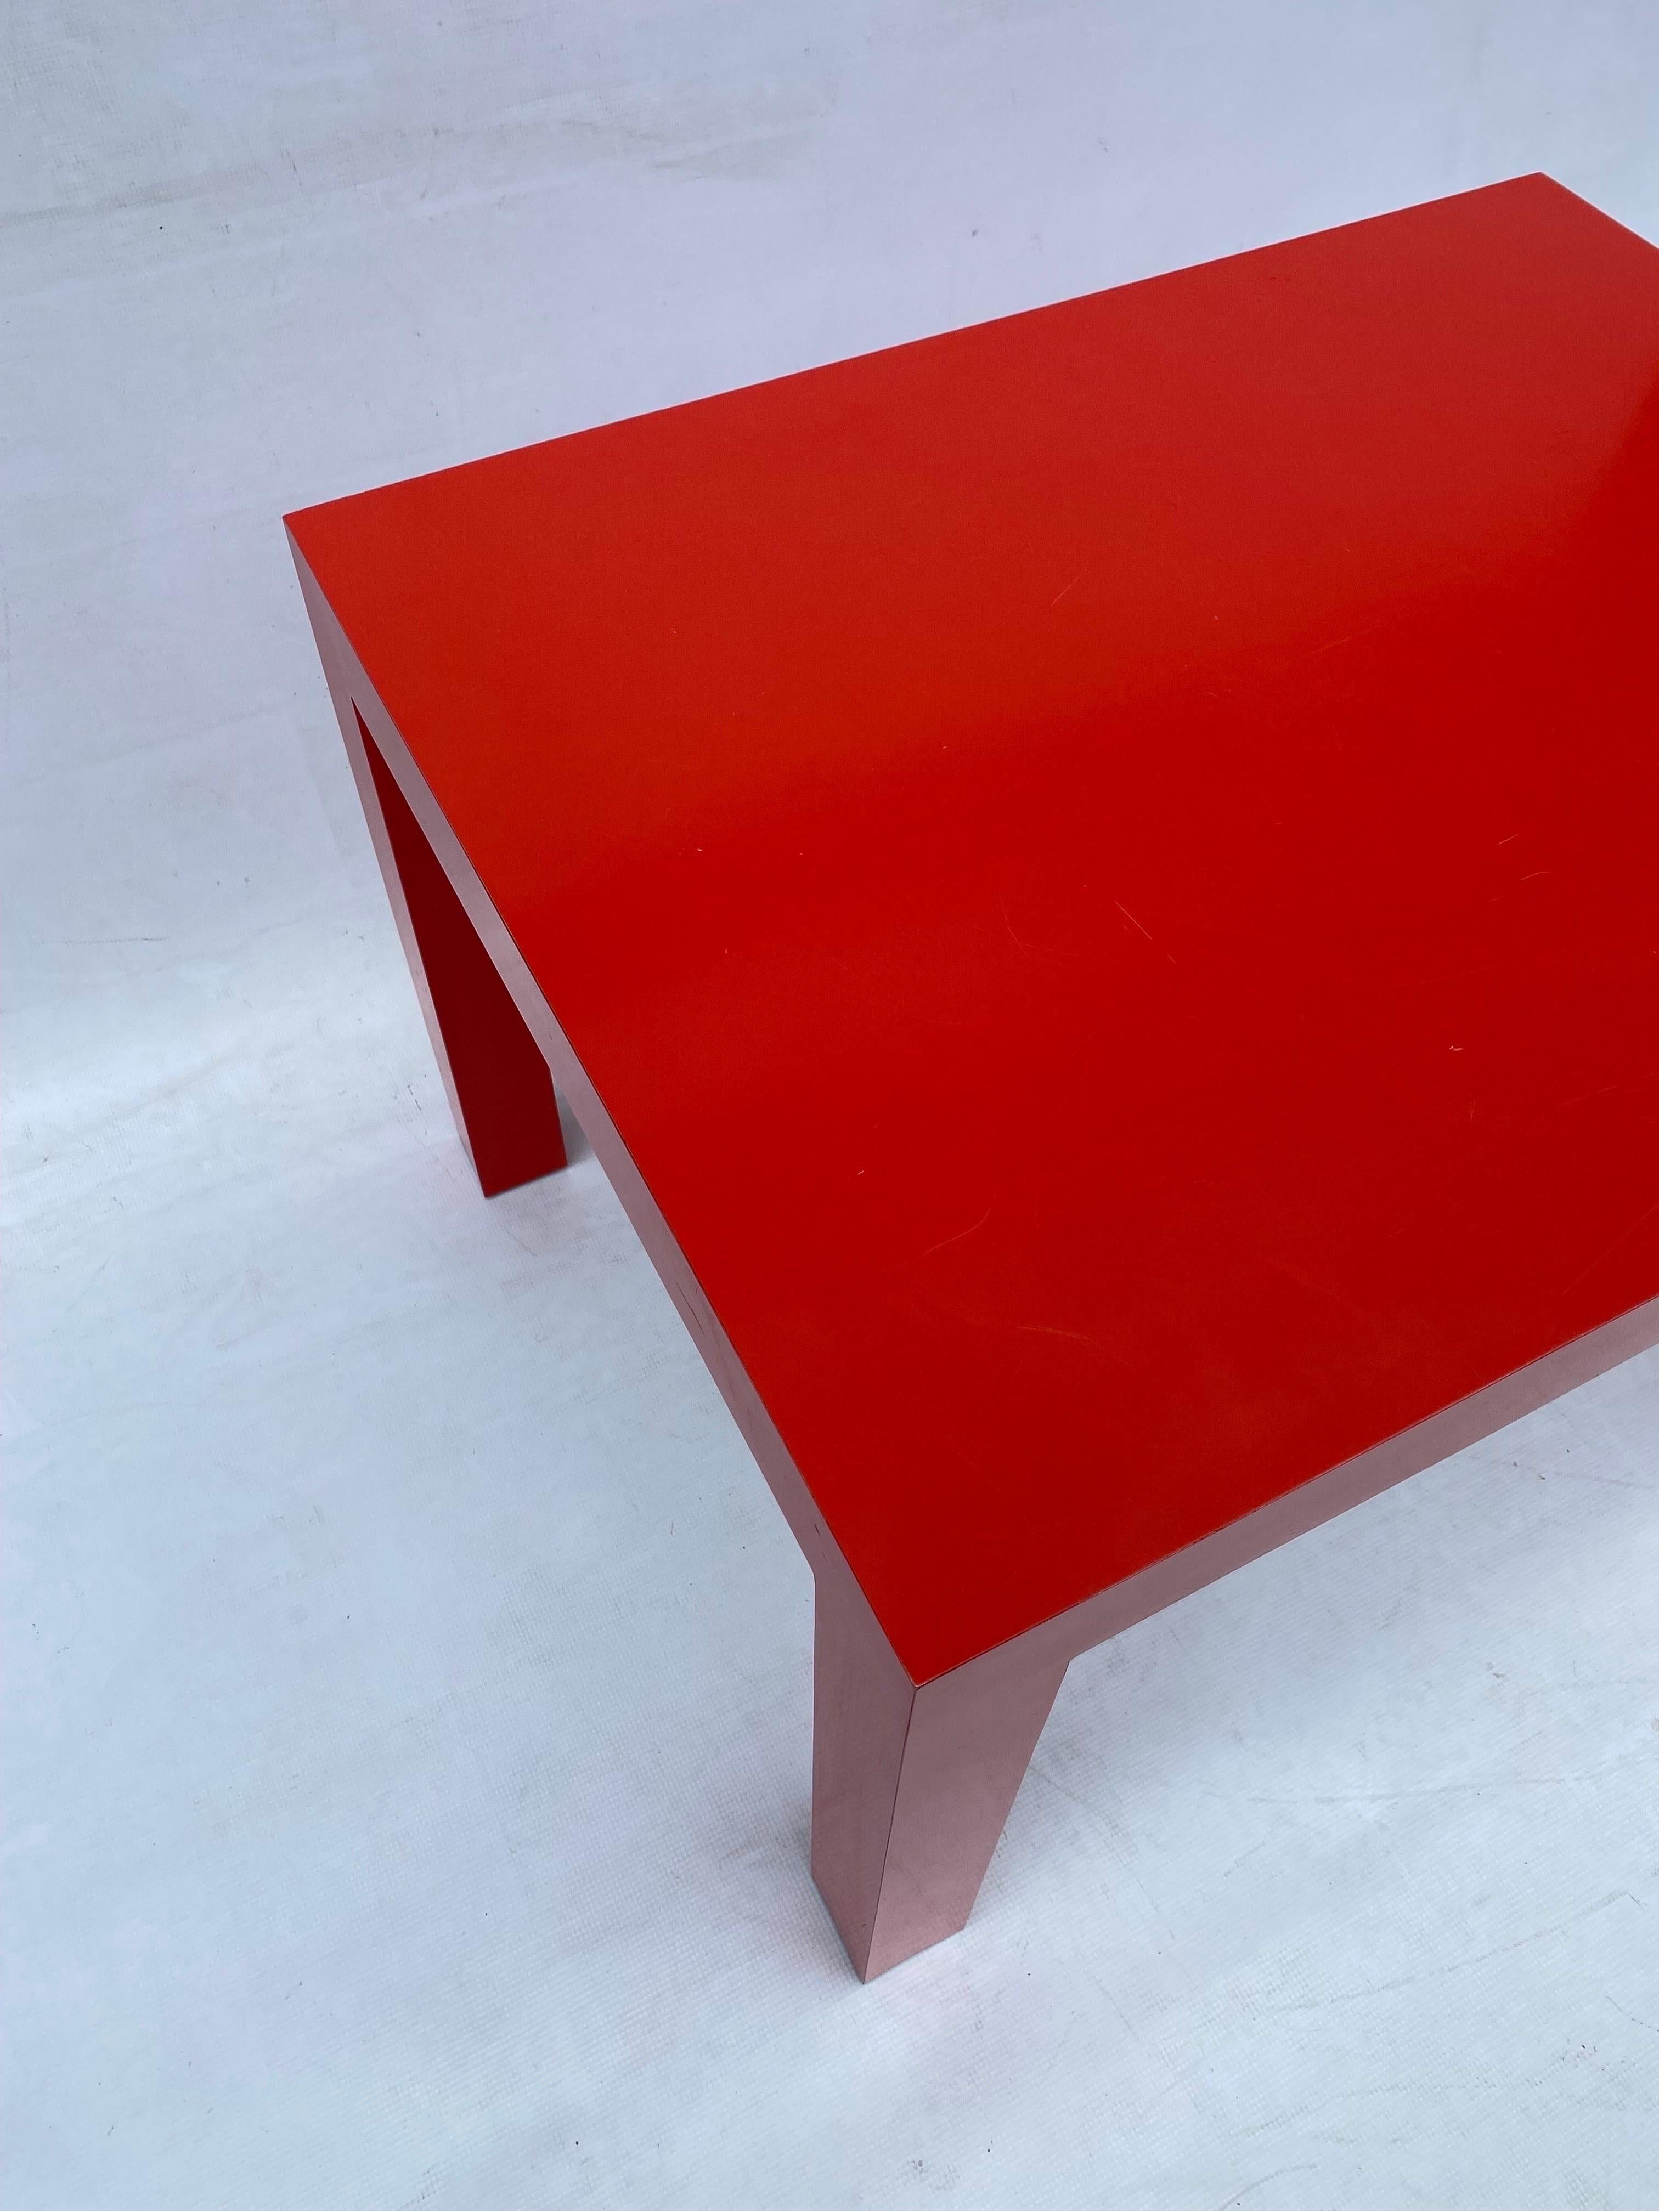 Milo Baughman for Thayer Coggin Formica Red Side Coffee Table 1960s Mid Century  For Sale 2